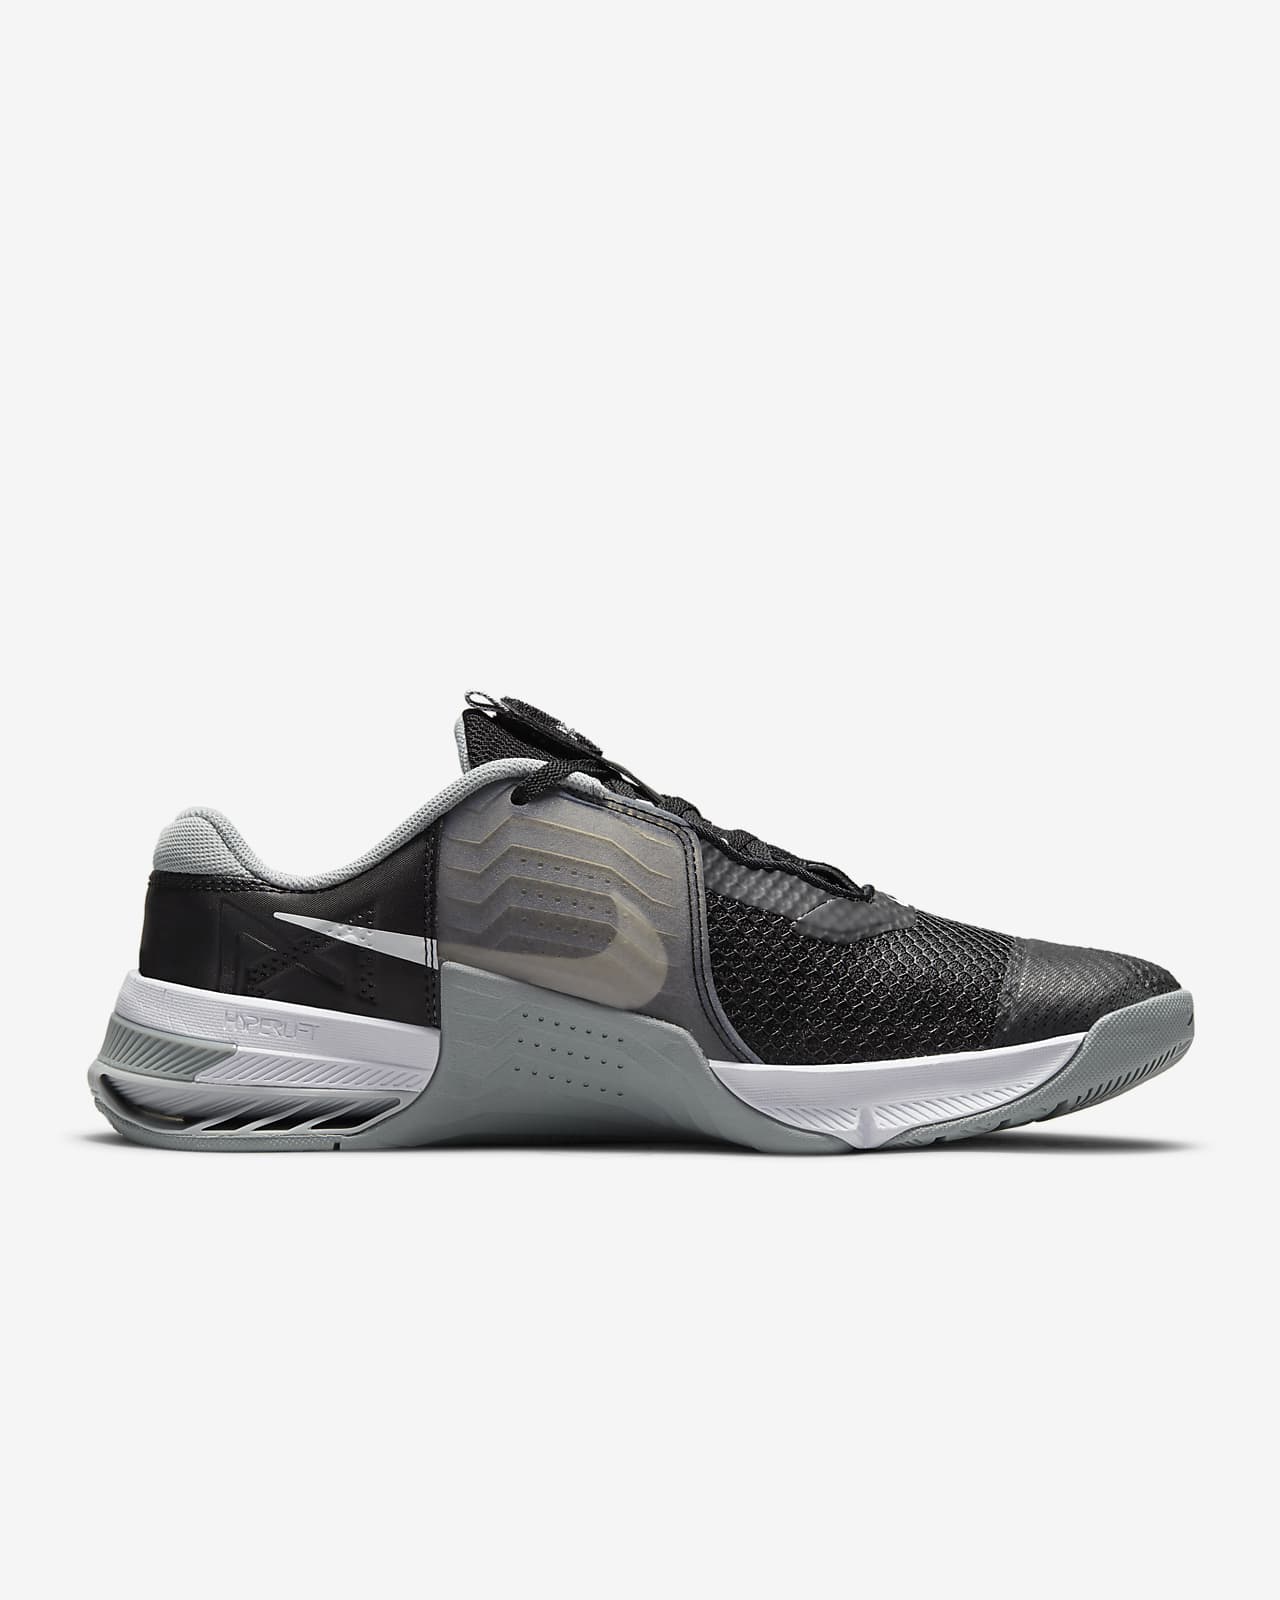 Nike Metcon 7 Workout Shoes